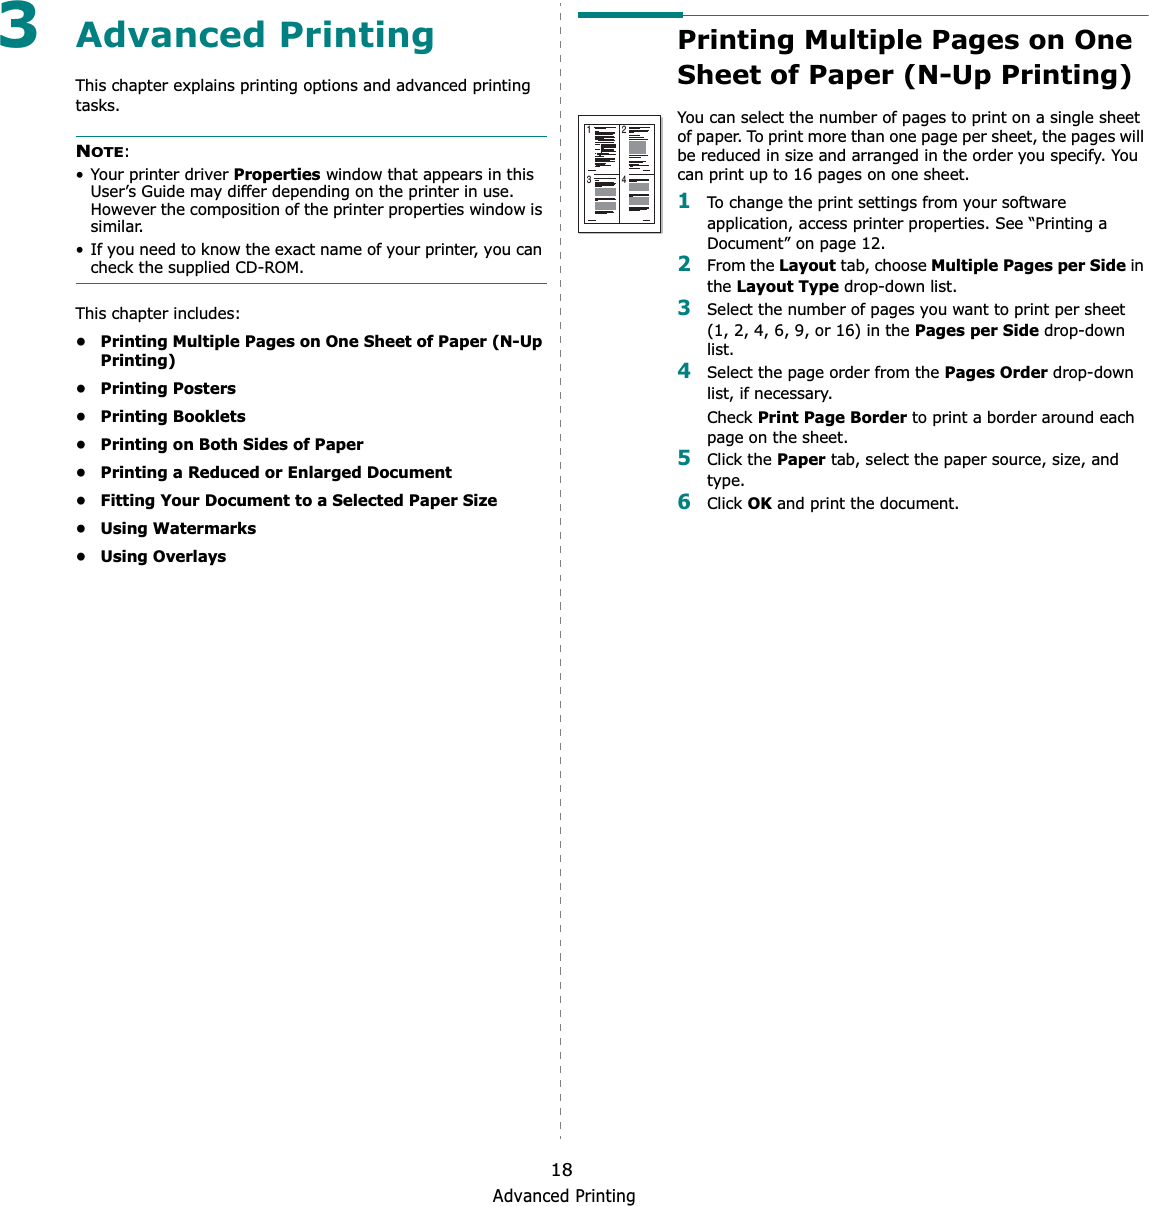 Advanced Printing183Advanced PrintingThis chapter explains printing options and advanced printing tasks. NOTE:• Your printer driver Properties window that appears in this User’s Guide may differ depending on the printer in use. However the composition of the printer properties window is similar.• If you need to know the exact name of your printer, you can check the supplied CD-ROM.This chapter includes:• Printing Multiple Pages on One Sheet of Paper (N-Up Printing)•Printing Posters• Printing Booklets• Printing on Both Sides of Paper• Printing a Reduced or Enlarged Document• Fitting Your Document to a Selected Paper Size•Using Watermarks•Using OverlaysPrinting Multiple Pages on One Sheet of Paper (N-Up Printing) You can select the number of pages to print on a single sheet of paper. To print more than one page per sheet, the pages will be reduced in size and arranged in the order you specify. You can print up to 16 pages on one sheet.  1To change the print settings from your software application, access printer properties. See “Printing a Document” on page 12.2From the Layout tab, choose Multiple Pages per Side in the Layout Type drop-down list. 3Select the number of pages you want to print per sheet (1, 2, 4, 6, 9, or 16) in the Pages per Side drop-down list.4Select the page order from the Pages Order drop-down list, if necessary.Check Print Page Border to print a border around each page on the sheet. 5Click the Paper tab, select the paper source, size, and type.6Click OK and print the document. 1 23 4